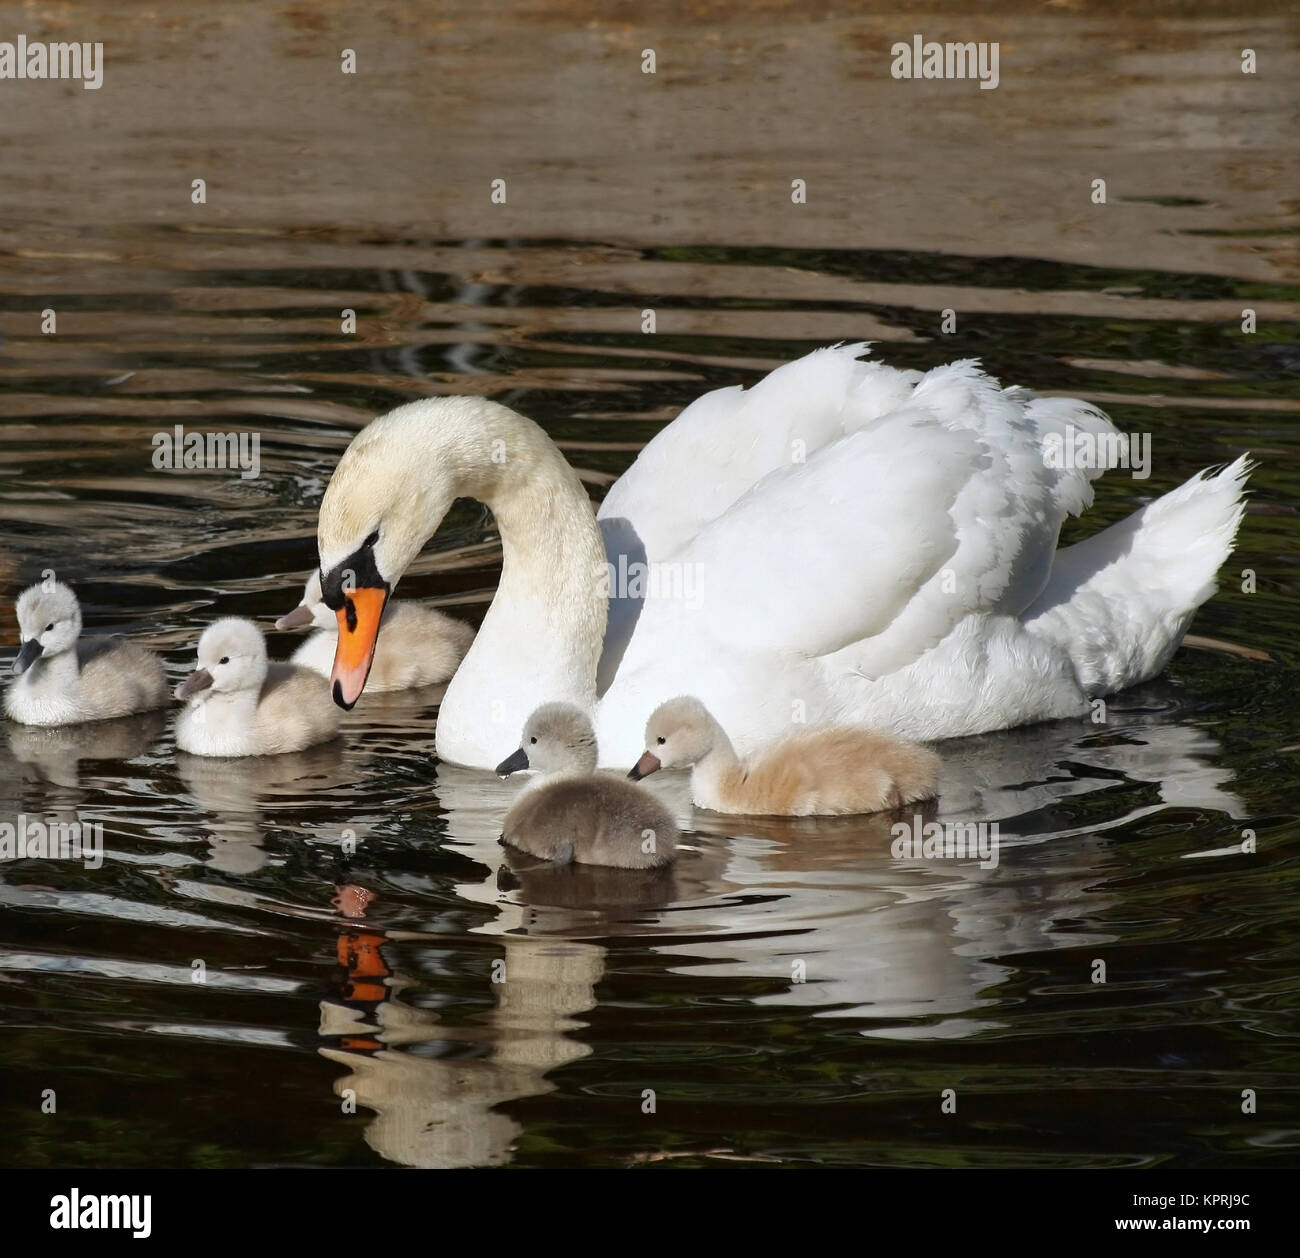 Beautiful Mute Swan with her FIVE young baby cygnets swimming on calm waters Stock Photo